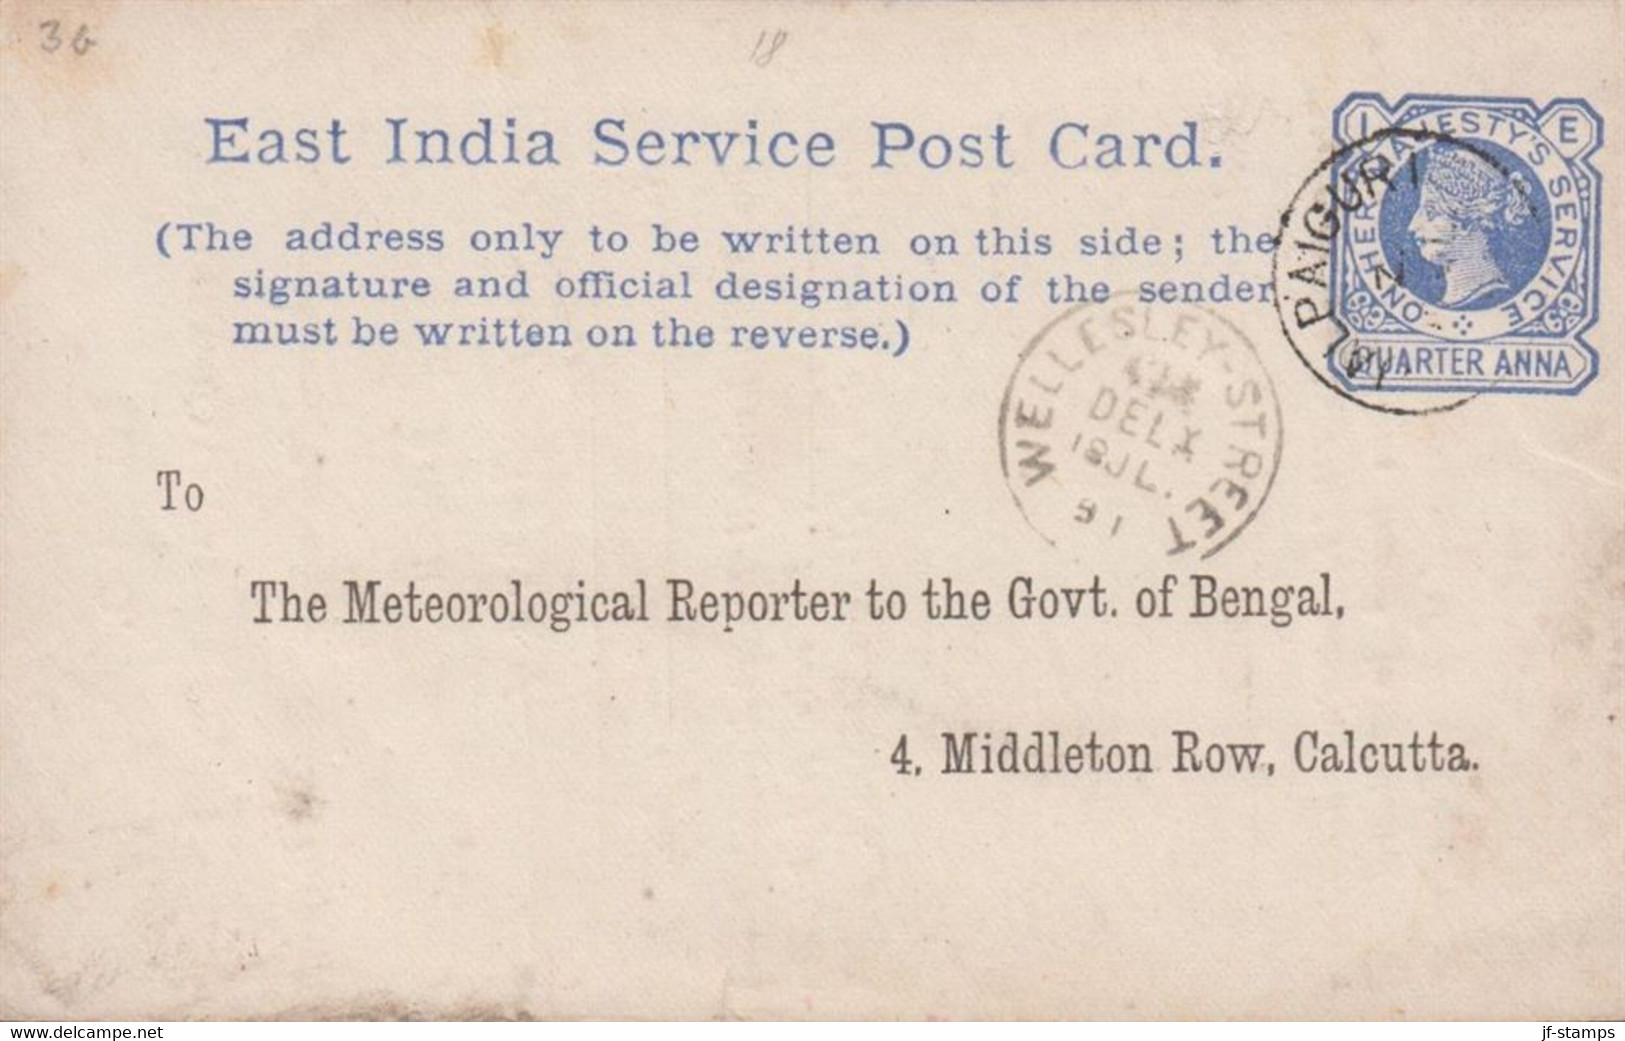 1891. EAST INDIA. Service POST CARD VICTORIA QUARTER ANNA FORM C DAILY RAINFALL REPORT Cancelled WELLESLEY... - JF427552 - Chamba